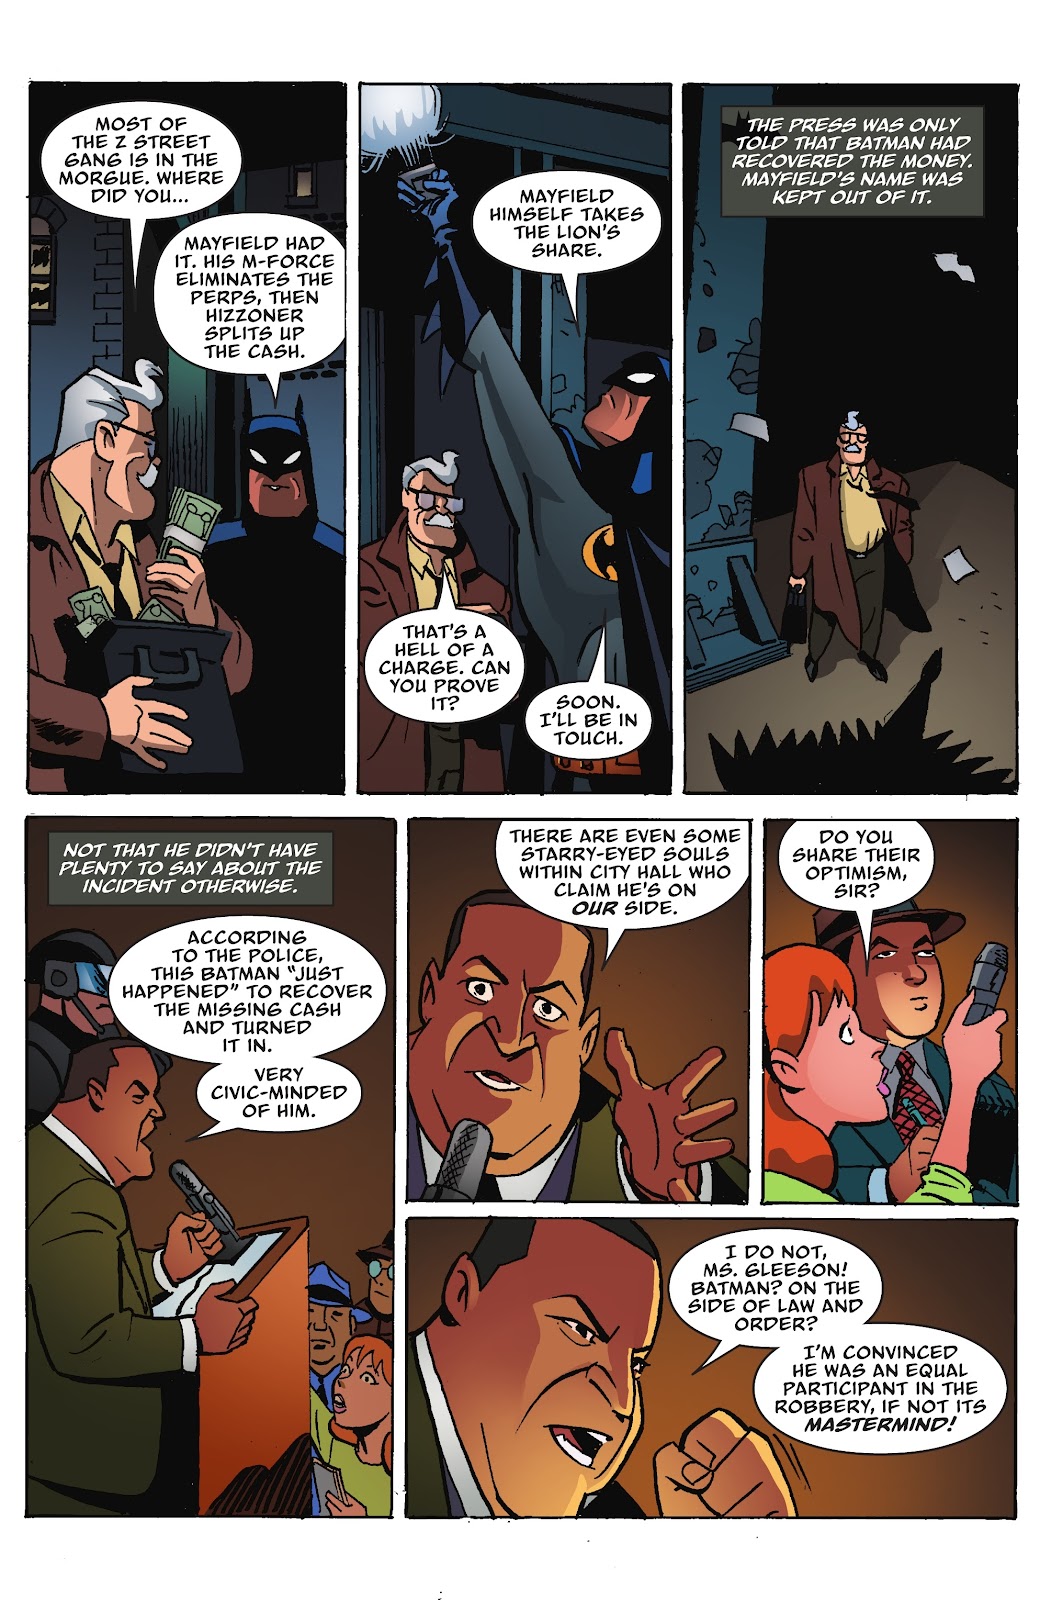 Batman: The Adventures Continue: Season Two issue 5 - Page 14